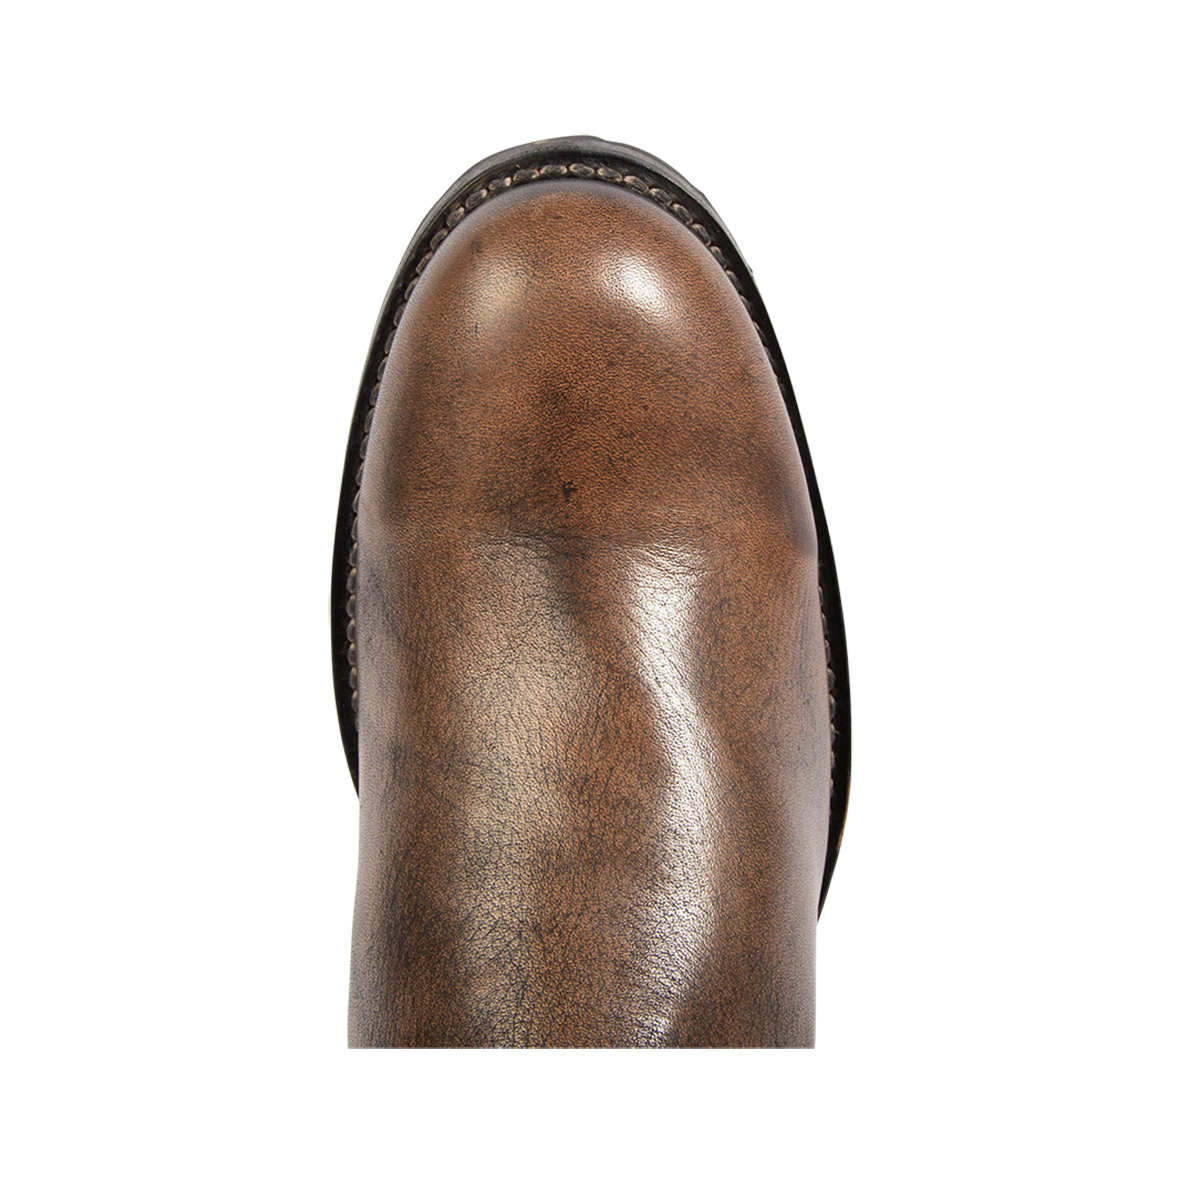 Top view showing rounded toe on and full grain leather on FREEBIRD men's Dallas brown distressed leather boot 